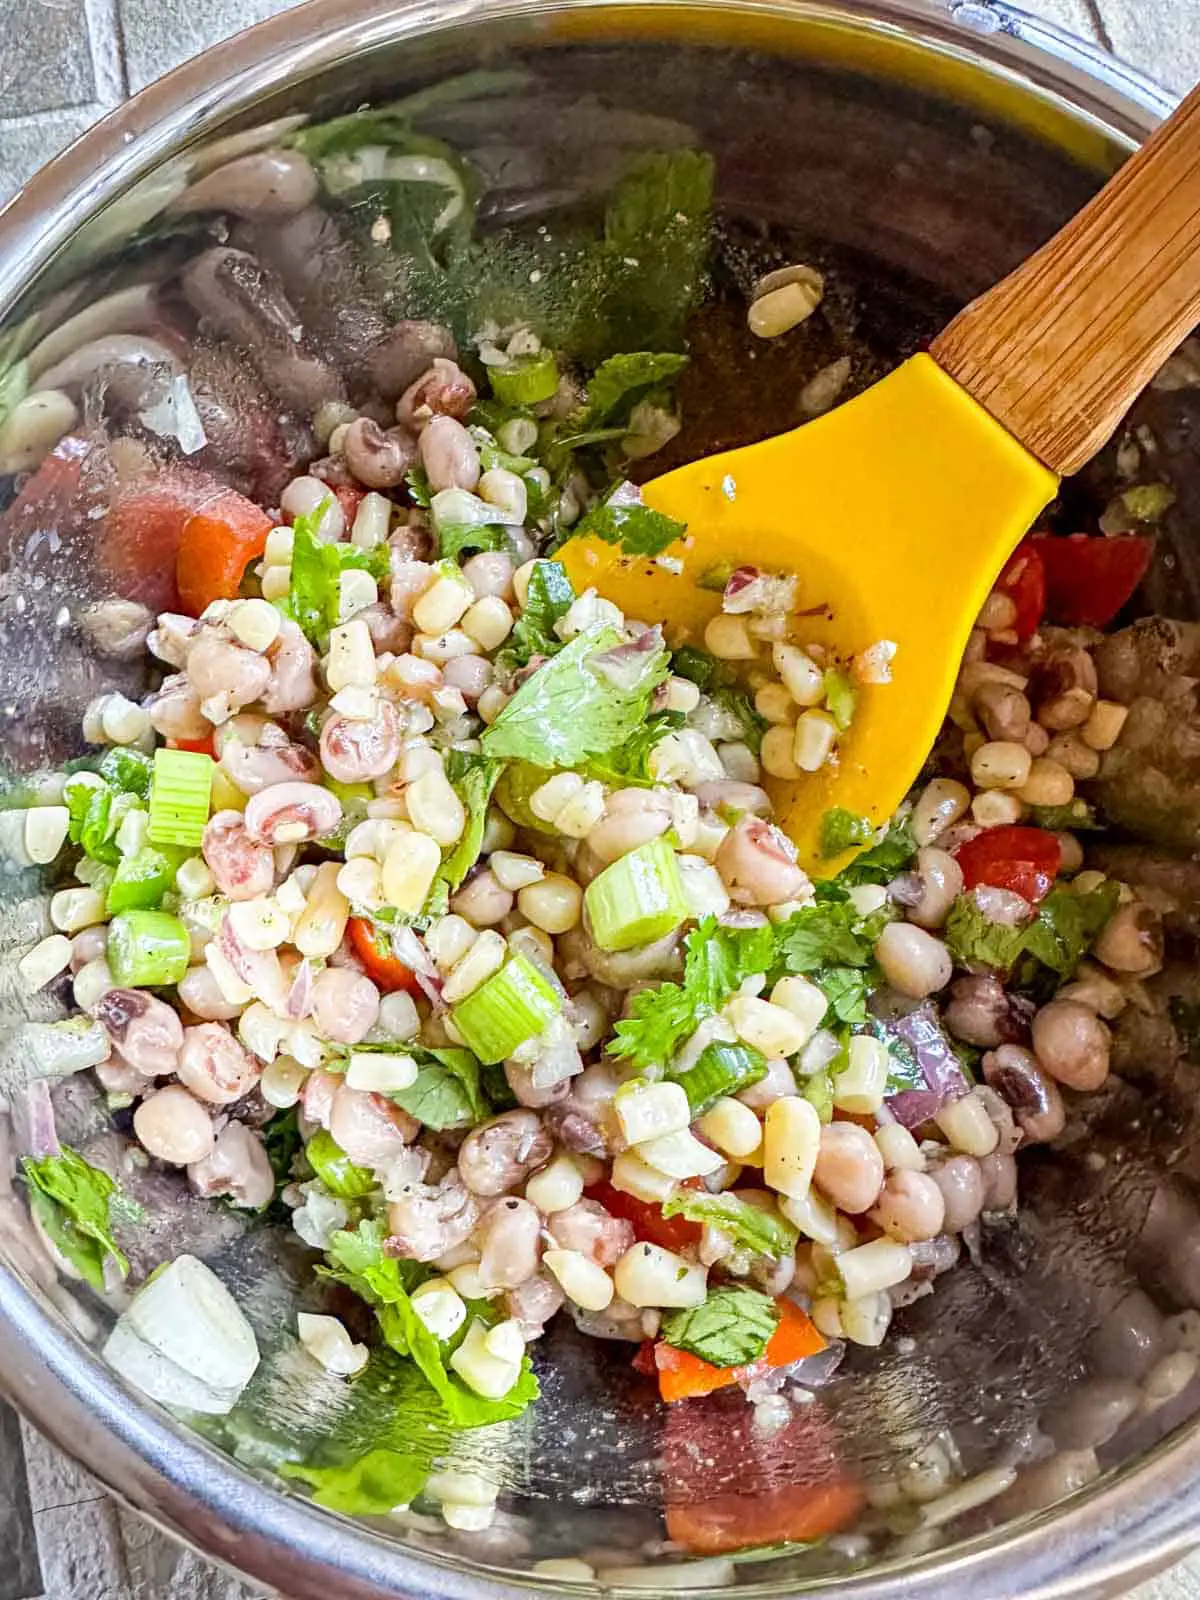 A metal bowl containing Texas caviar which is shoepeg corn, black eyed peas, green onions, cilantro, grape tomatoes, and minced garlic, onion, and jalapeno pepper. This mixture has been combined and there is a yellow spoon with a wooden handle in the bowl.